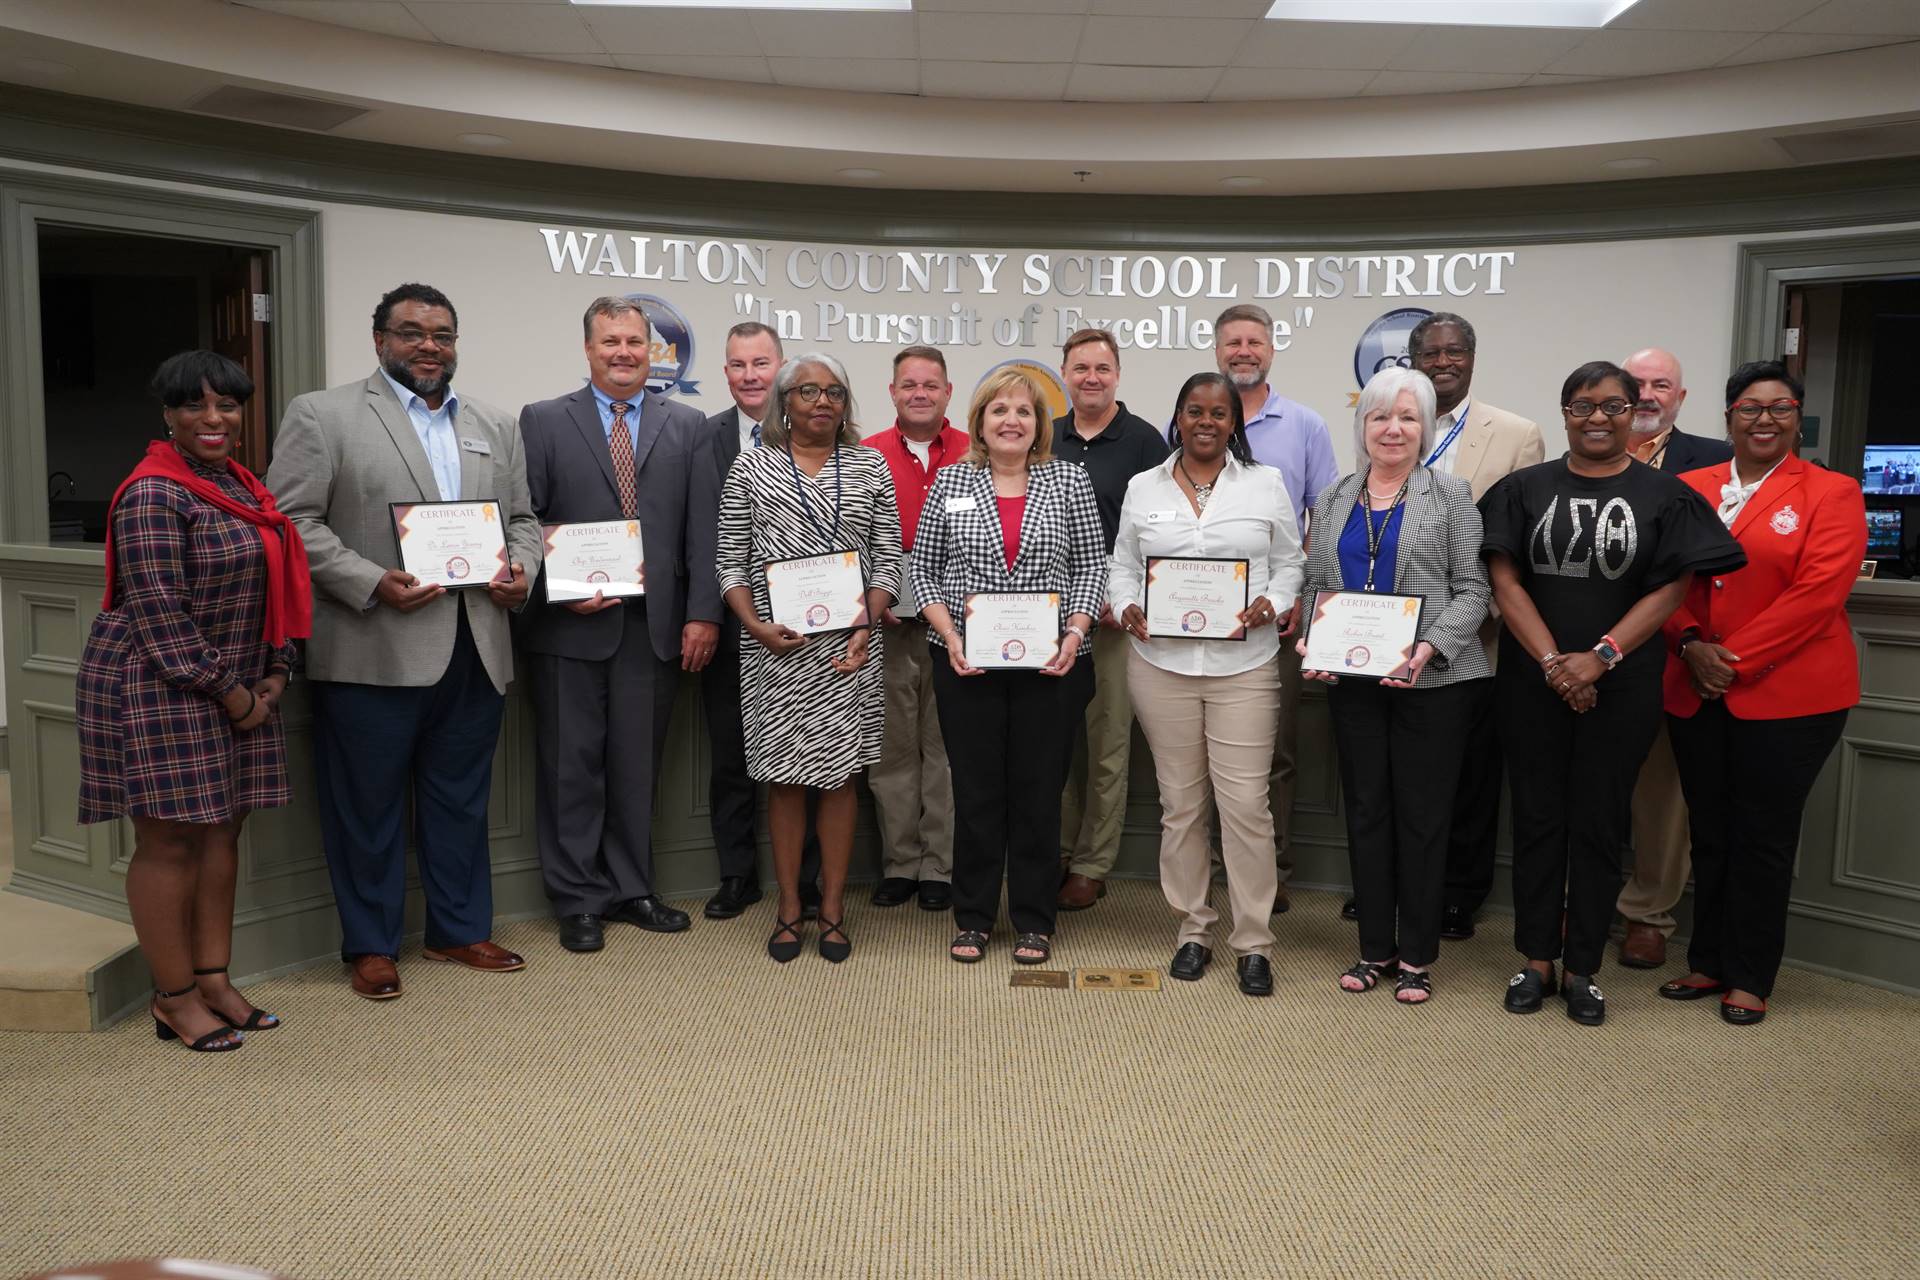 BOE Meeting Recognition